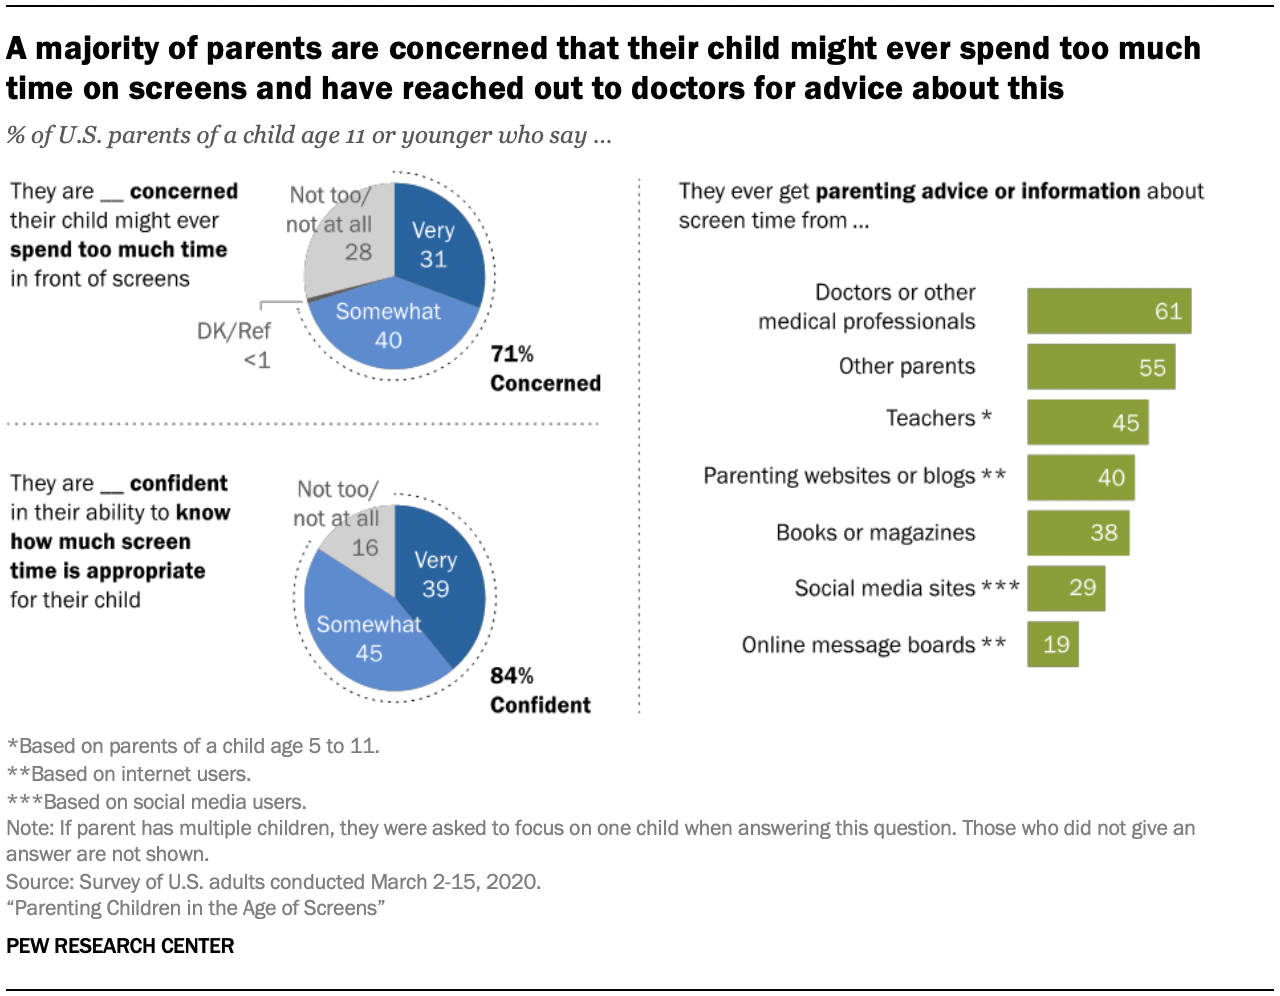 Chart shows a majority of parents are concerned that their child might ever spend too much time on screens and have reached out to doctors for advice about this